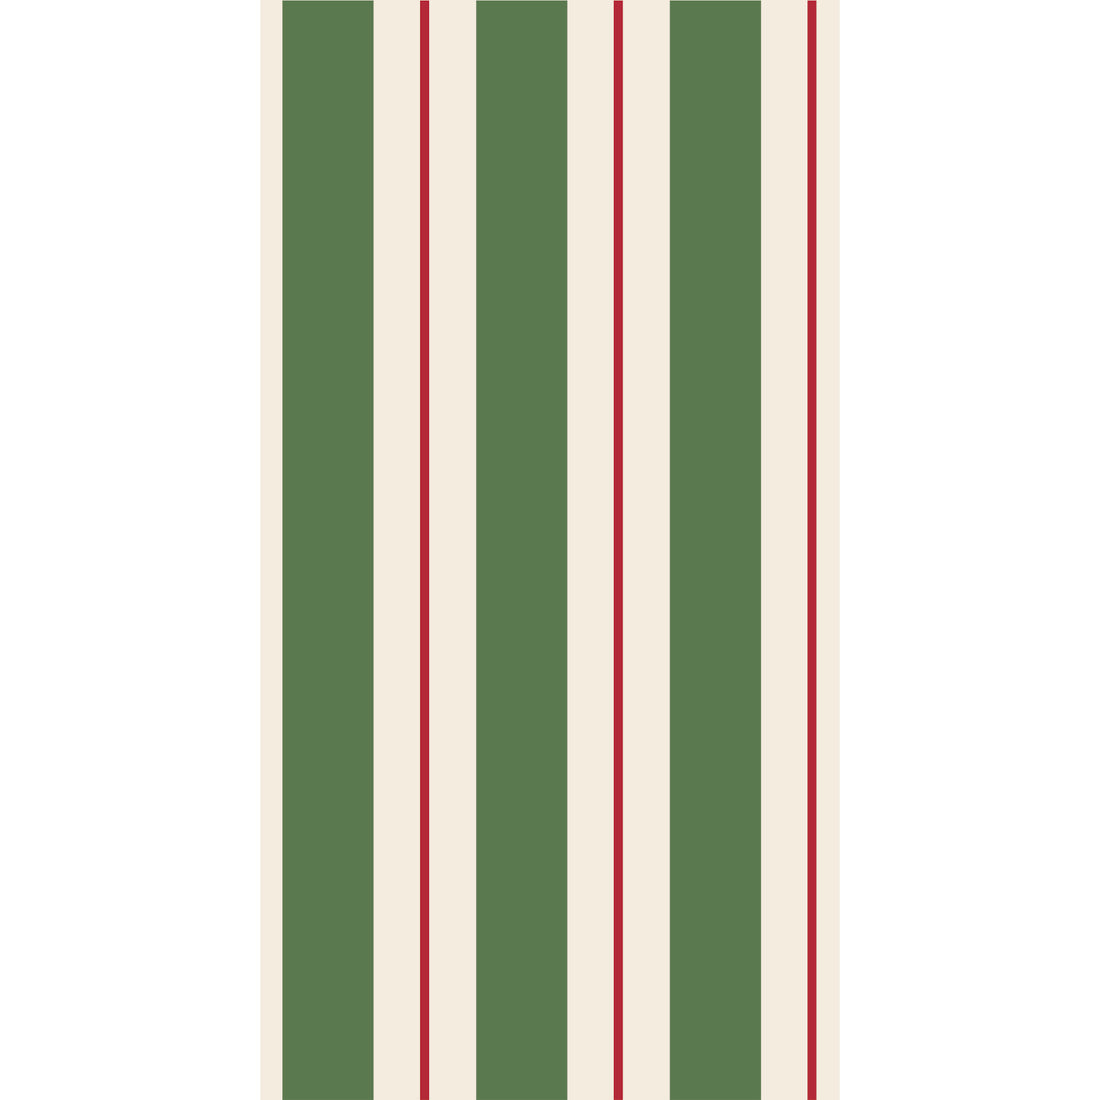 A rectangle guest napkin featuring vertical dark green and white stripes, with a thin red line centered in each white stripe.